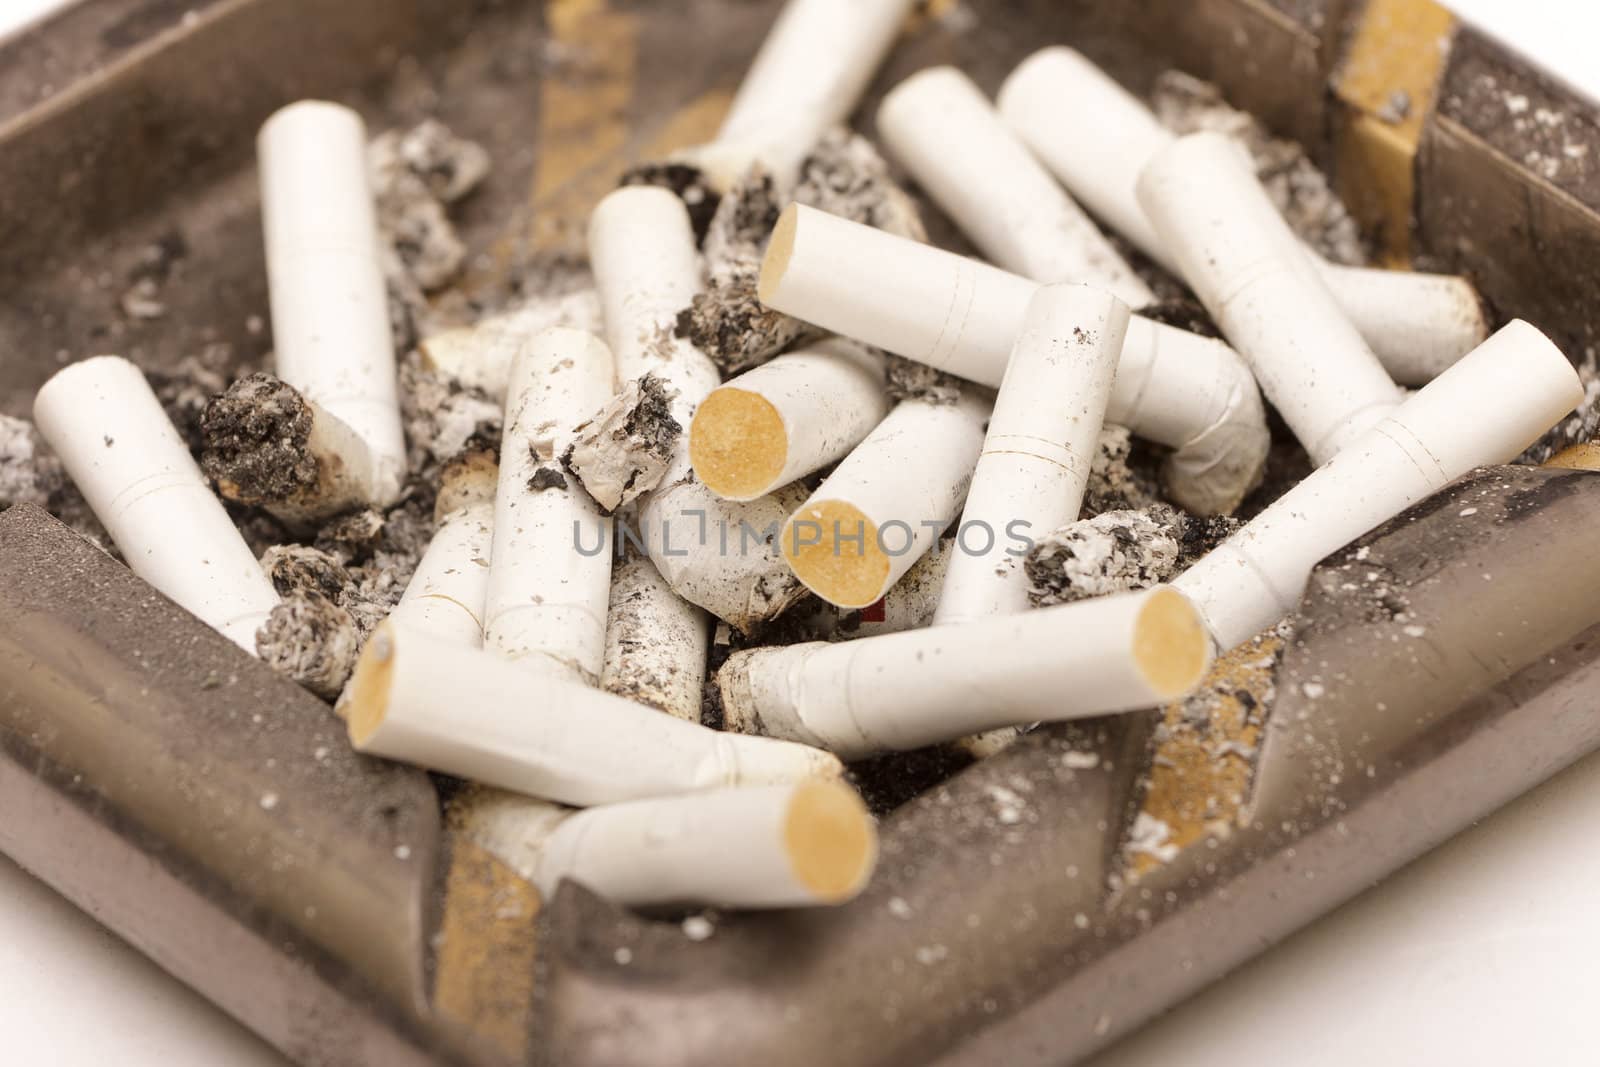 photo of ashtray with butts, closeup